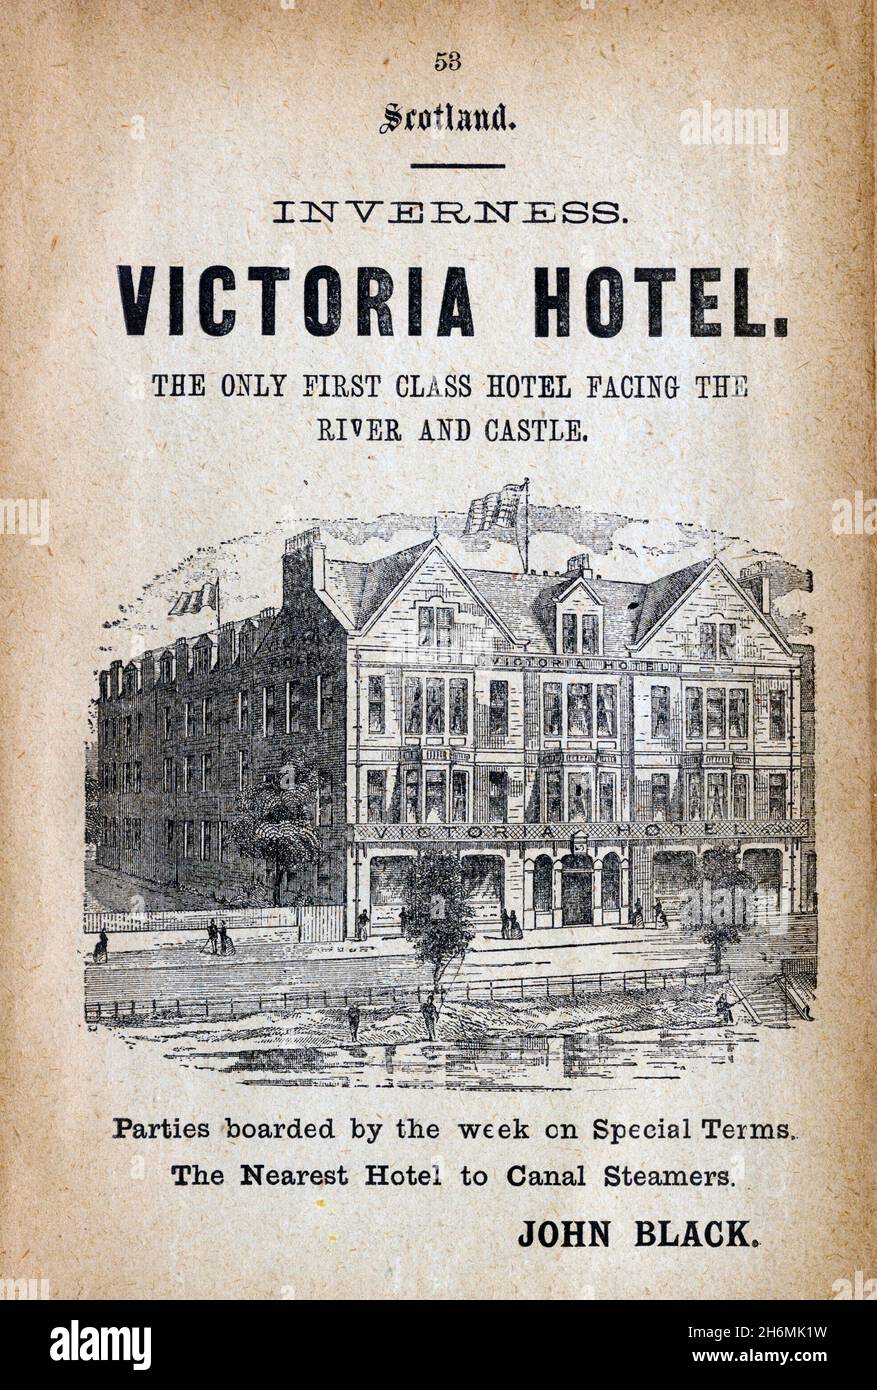 Vintage advertisement page from an 1889 Baddeley's Thorough Guide to the English Lake District.  Featuring the Victoria Hotel, Inverness, Scotland, UK Stock Photo